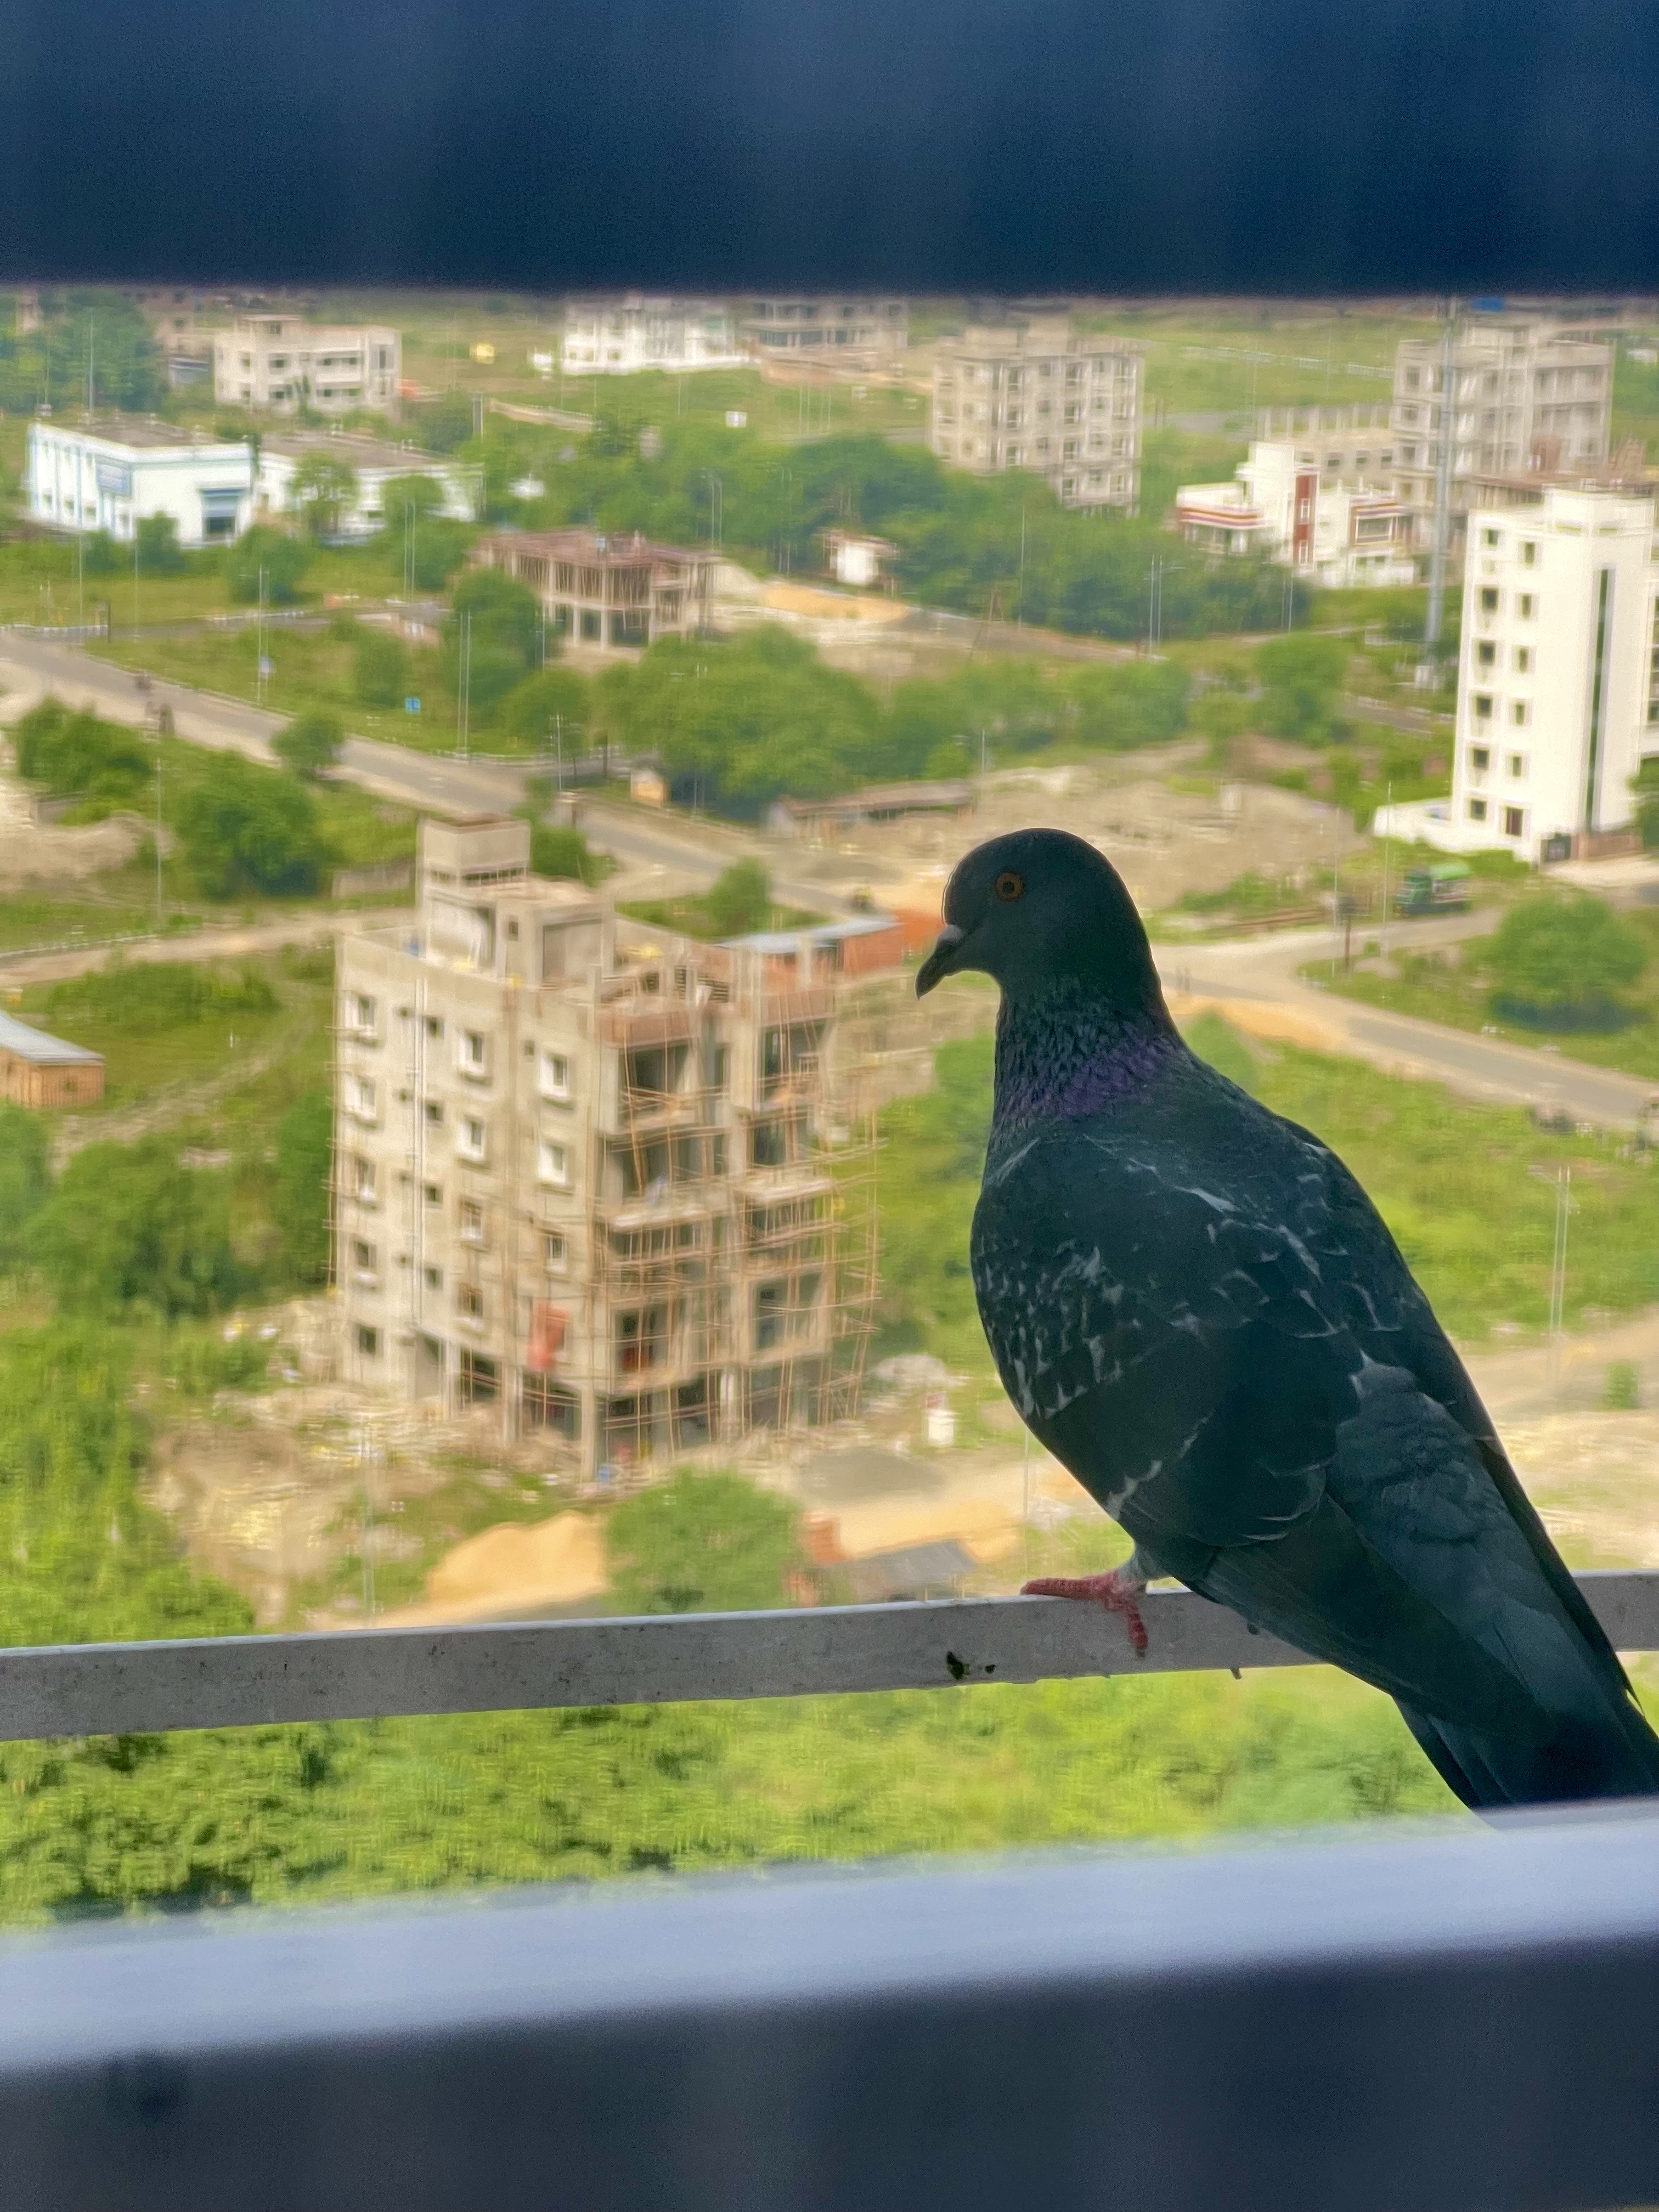 A bird visiting our bedroom window.